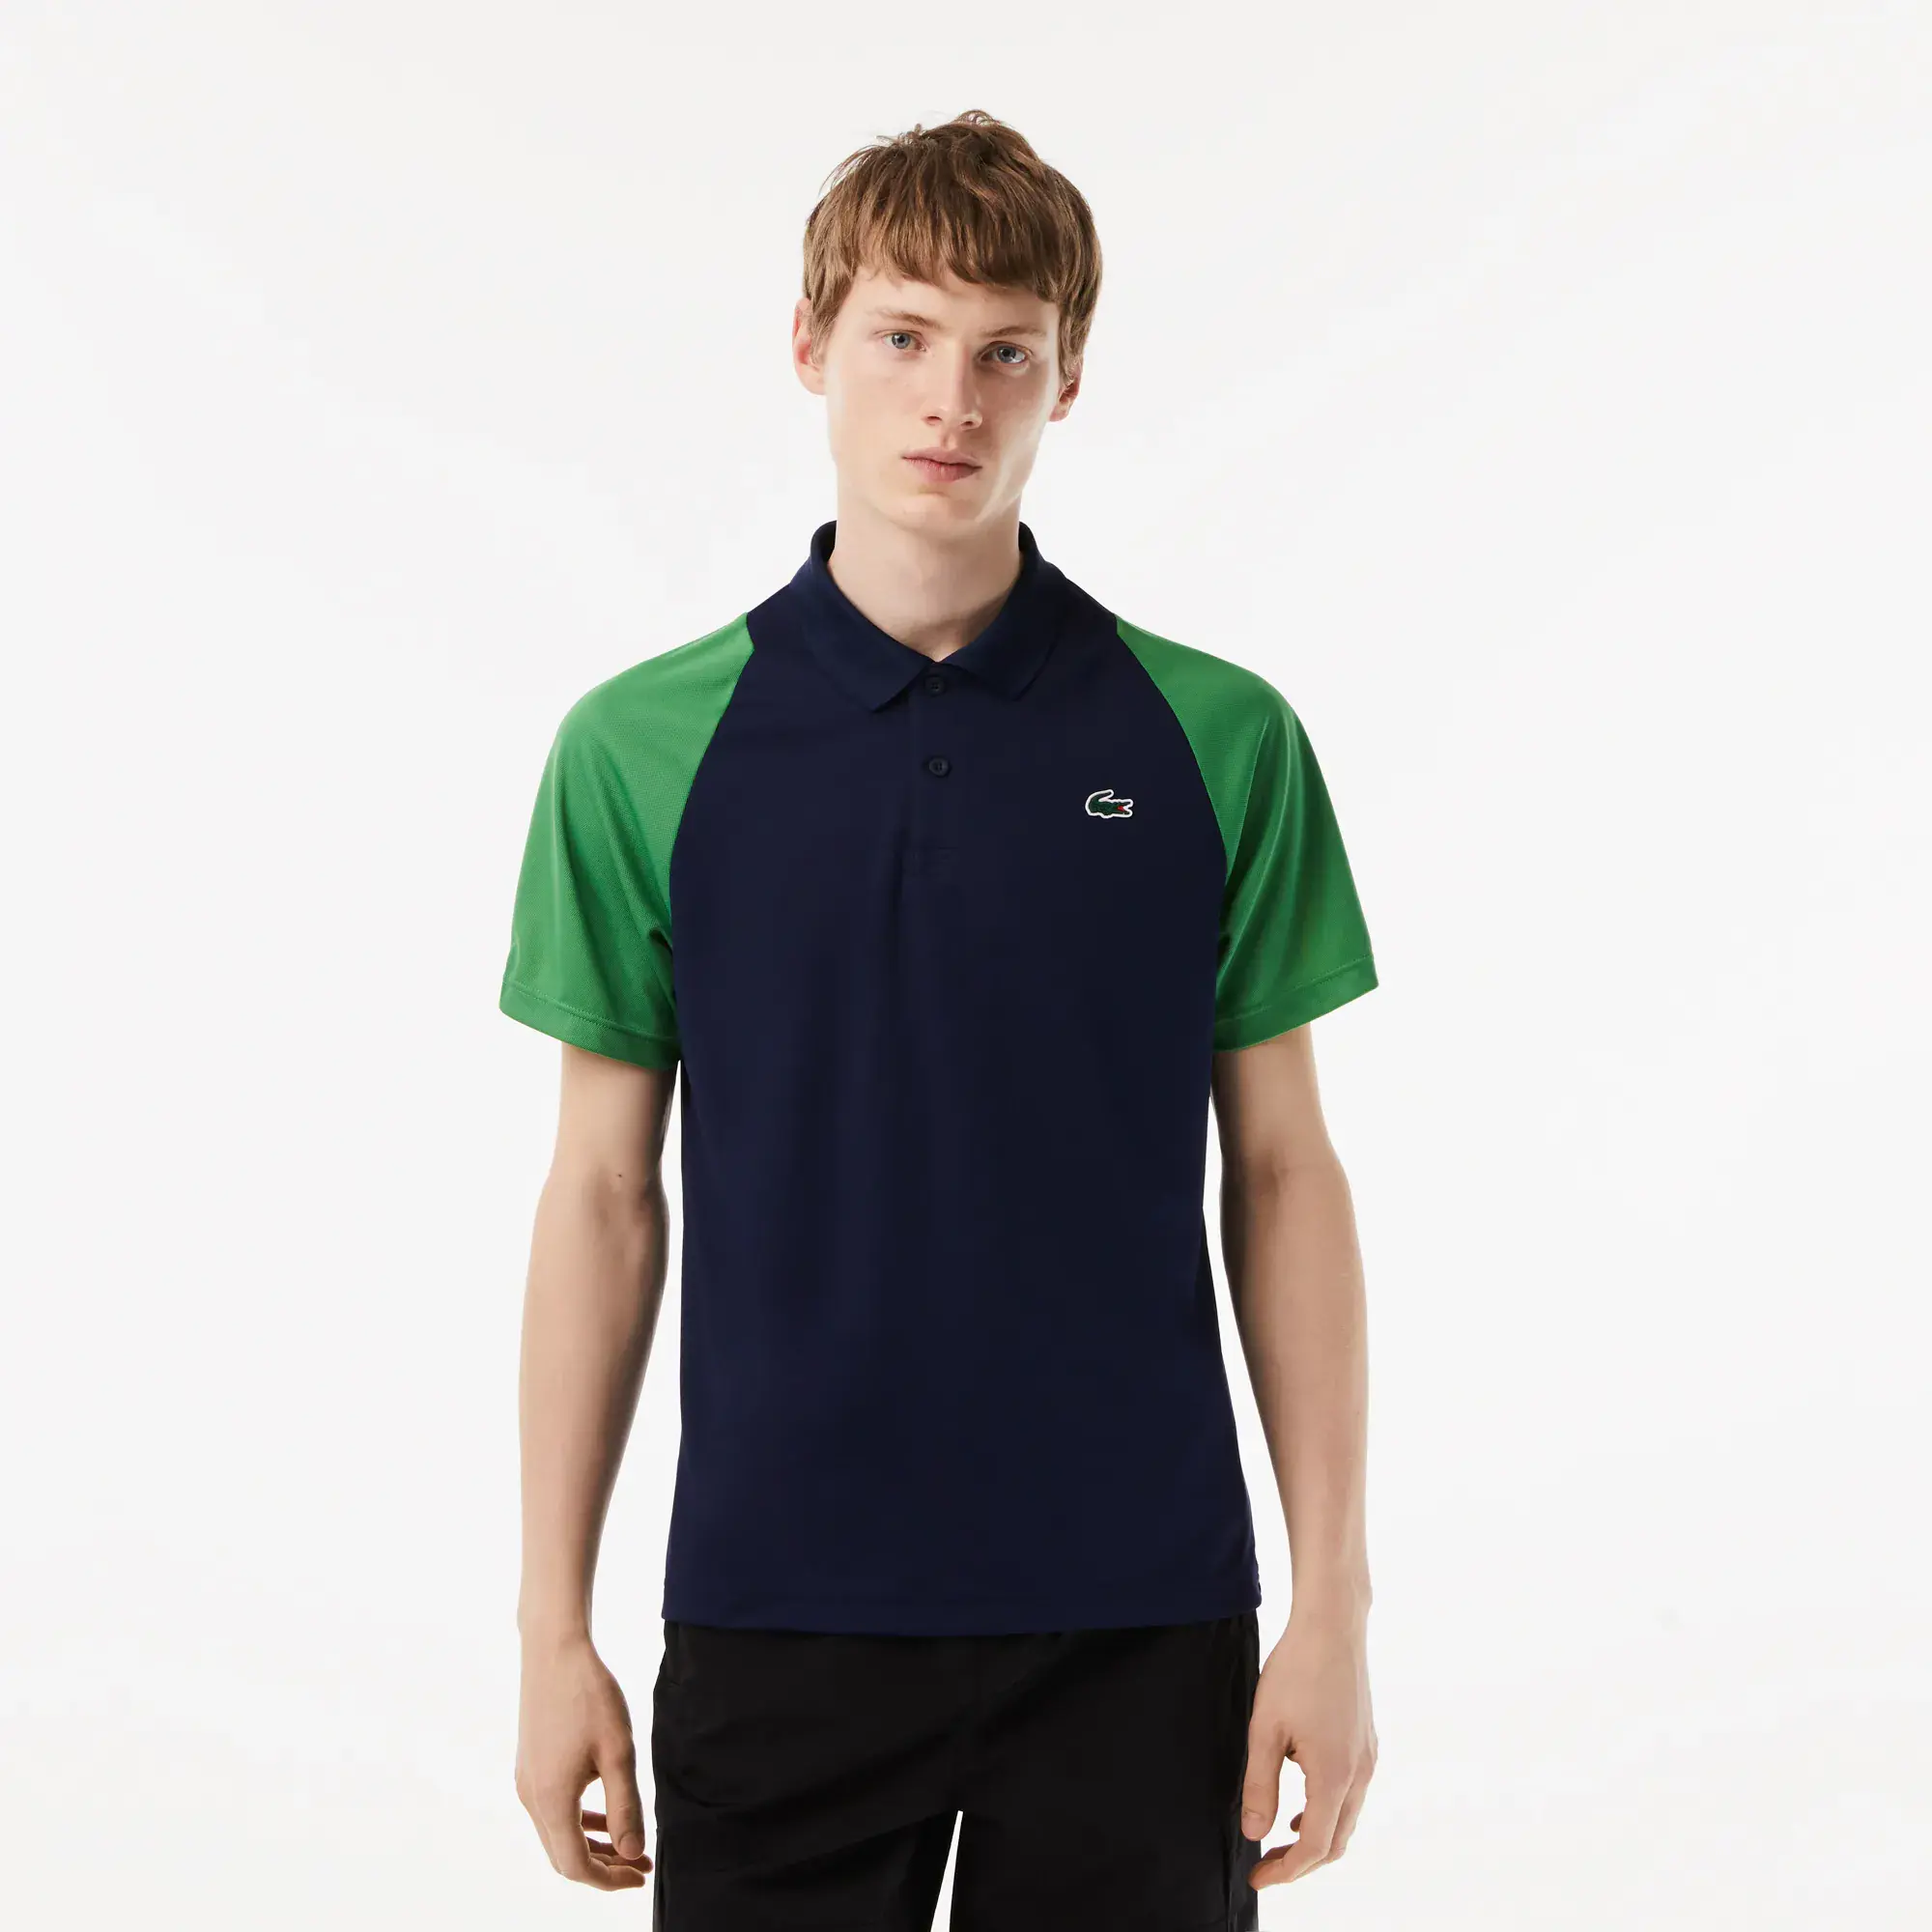 Lacoste Men’s Tennis Recycled Polyester Polo Shirt. 1